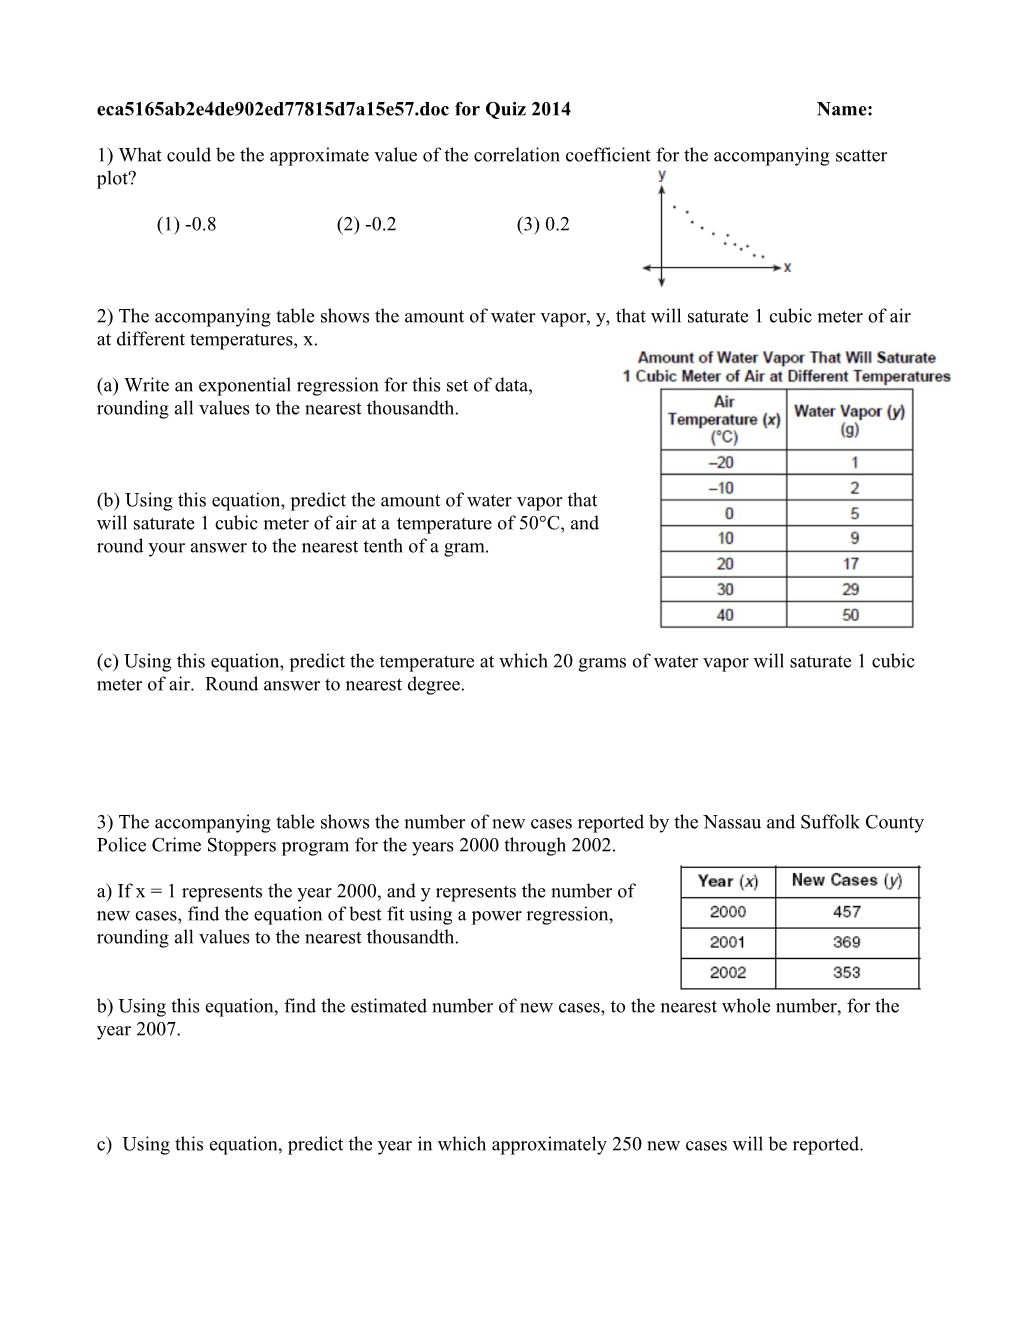 Statistics Review for Quiz